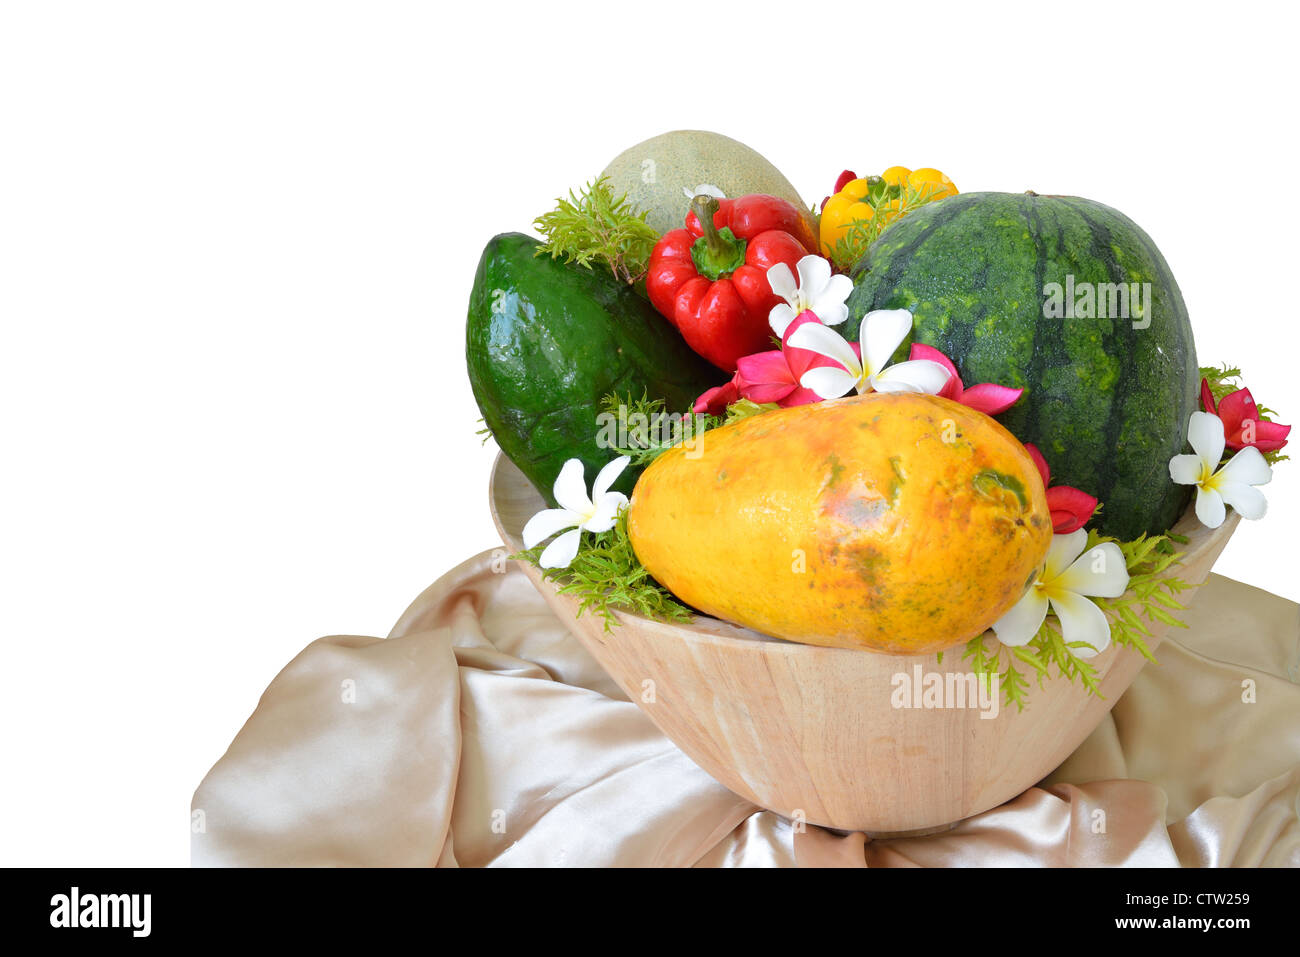 Decoration fruit with flower and vegetable in the wooden bowl and isolated on white background. Stock Photo